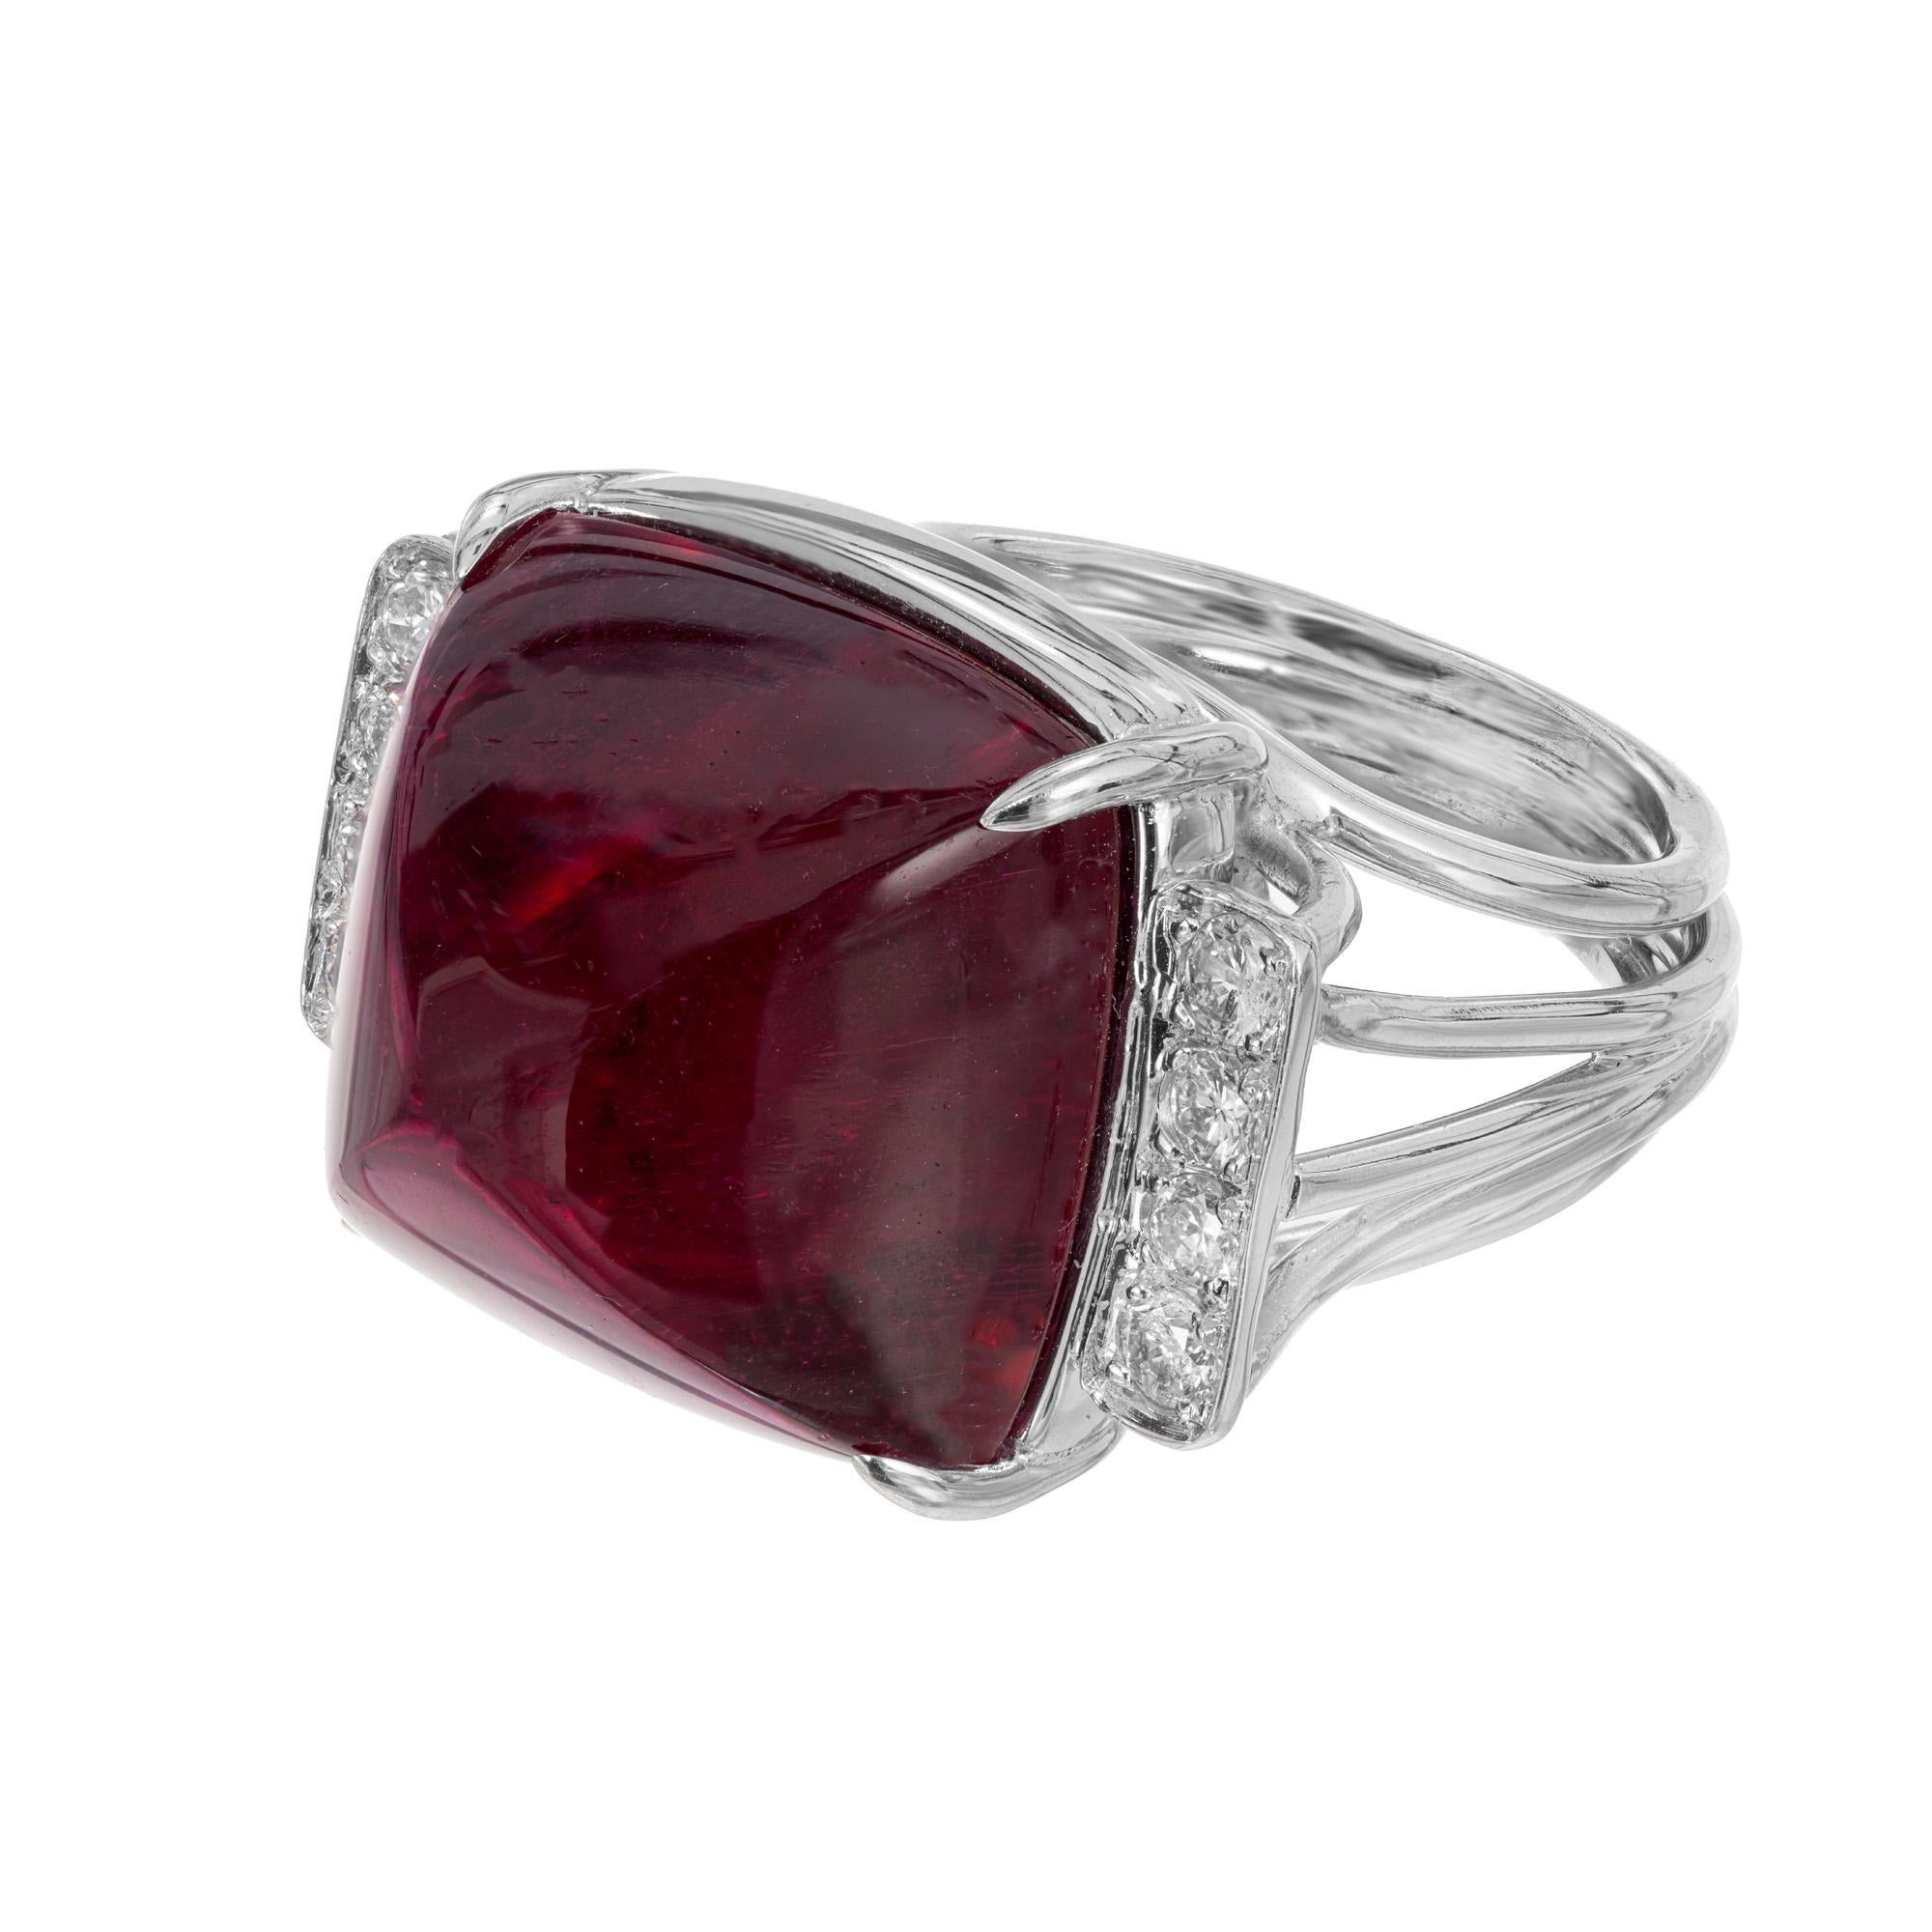 1950's Beautiful sugar loaf cut red Tourmaline Rubellite and diamond cocktail ring. This stunning rich red cabochon tourmaline is 27.49cts and is mounted in a platinum handmade wire gallery and shank. The stone is accented with 4 round cut diamonds